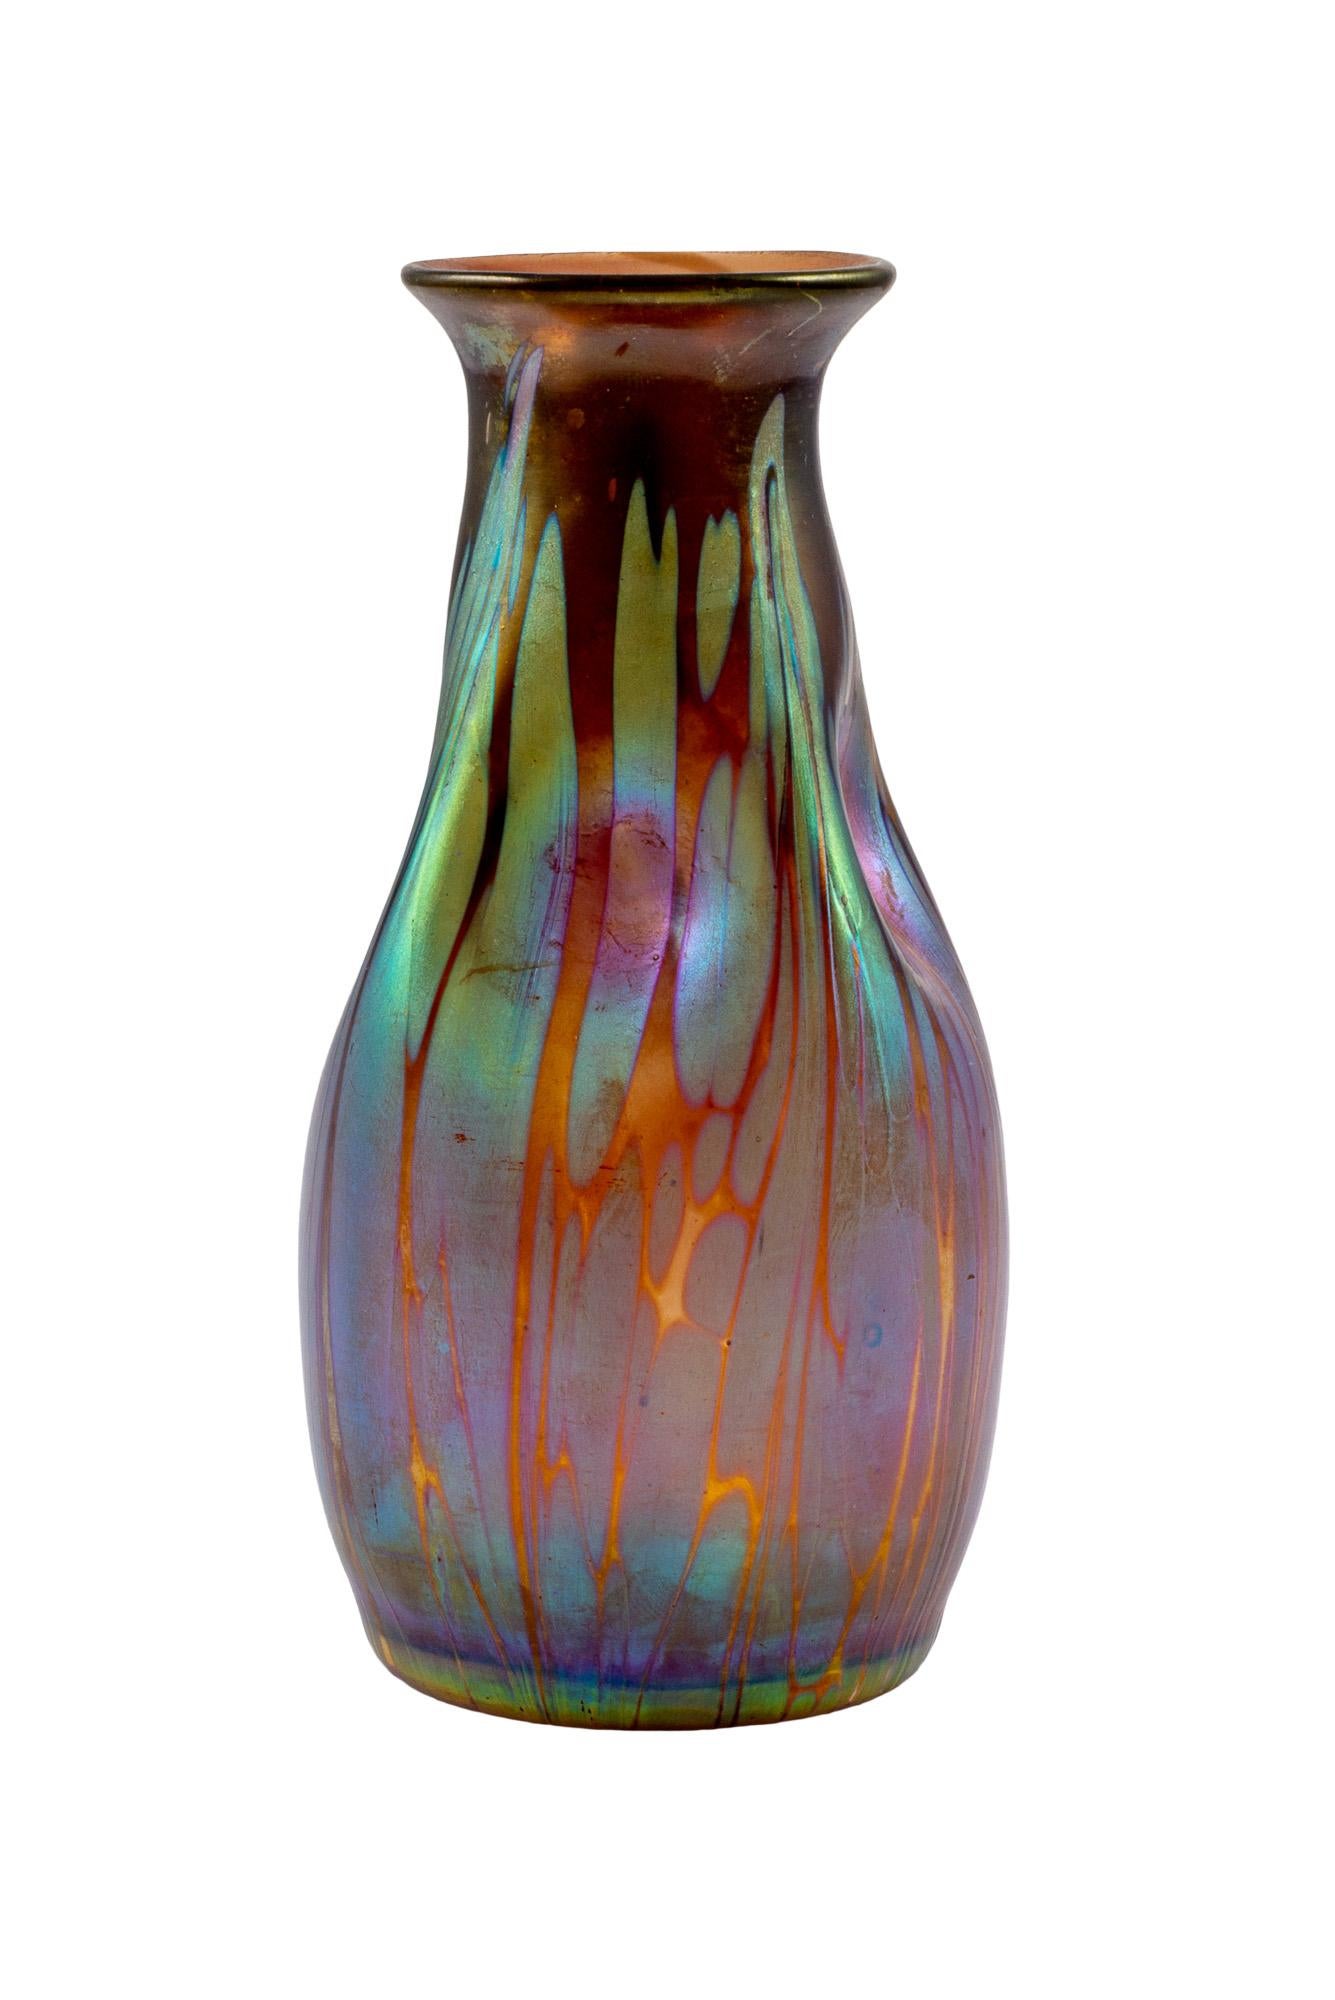 Austrian Jugendstil mouthblown glass vase brown circa 1902 Johann Loetz-Witwe Medici Maron Phen Gr 2/484

In 1900, the company Johann Loetz-Witwe Klostermühle made its international breakthrough at the world exhibition in Paris with its richly